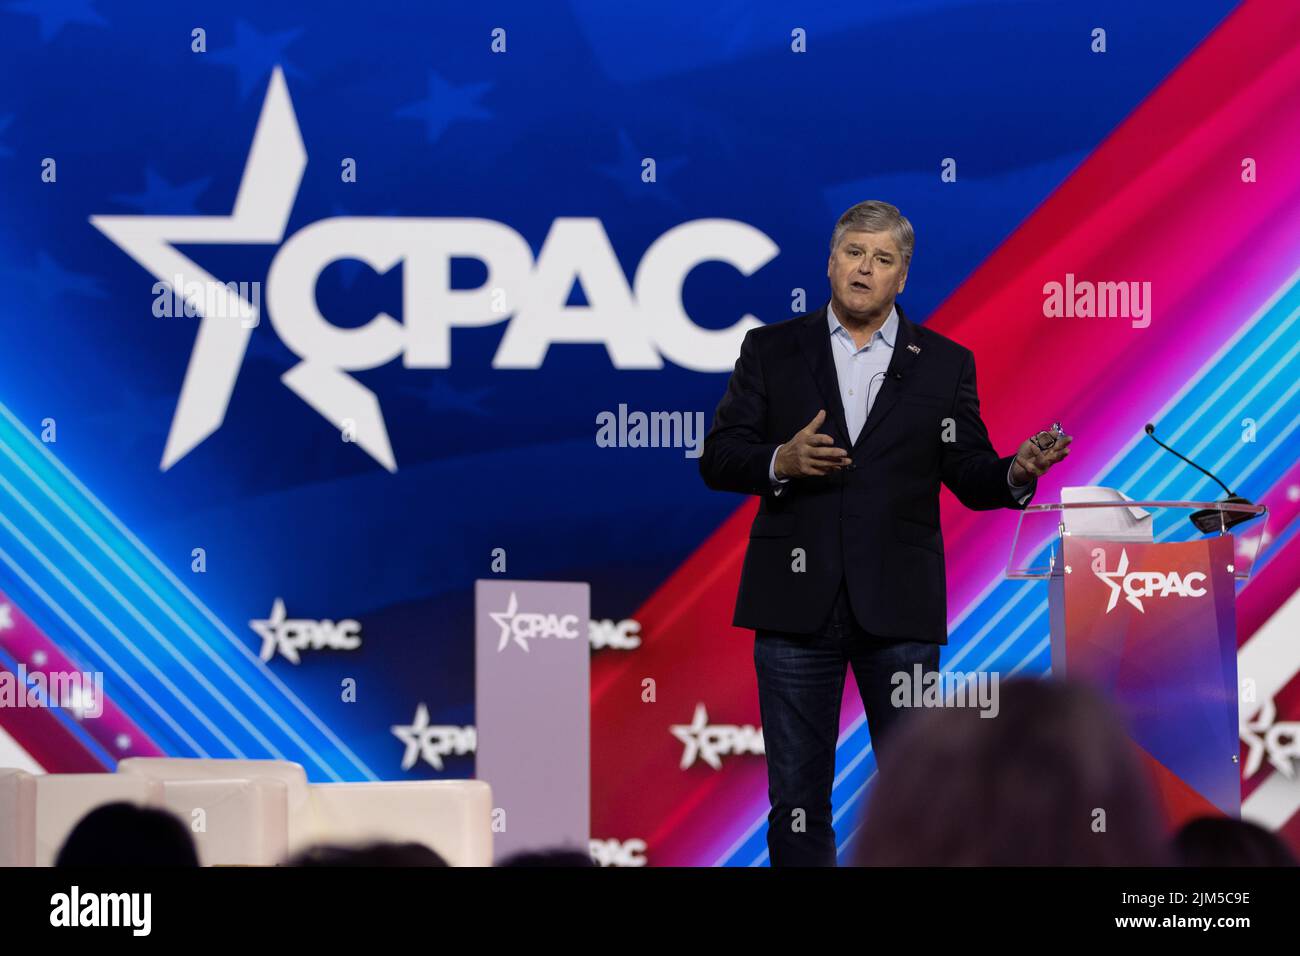 Dallas, USA. 04 Aug 2022. Sean Hannity delivers remarks at the Conservative Political Action Conference. Credit: Valerio Pucci / Alamy Stock Photo